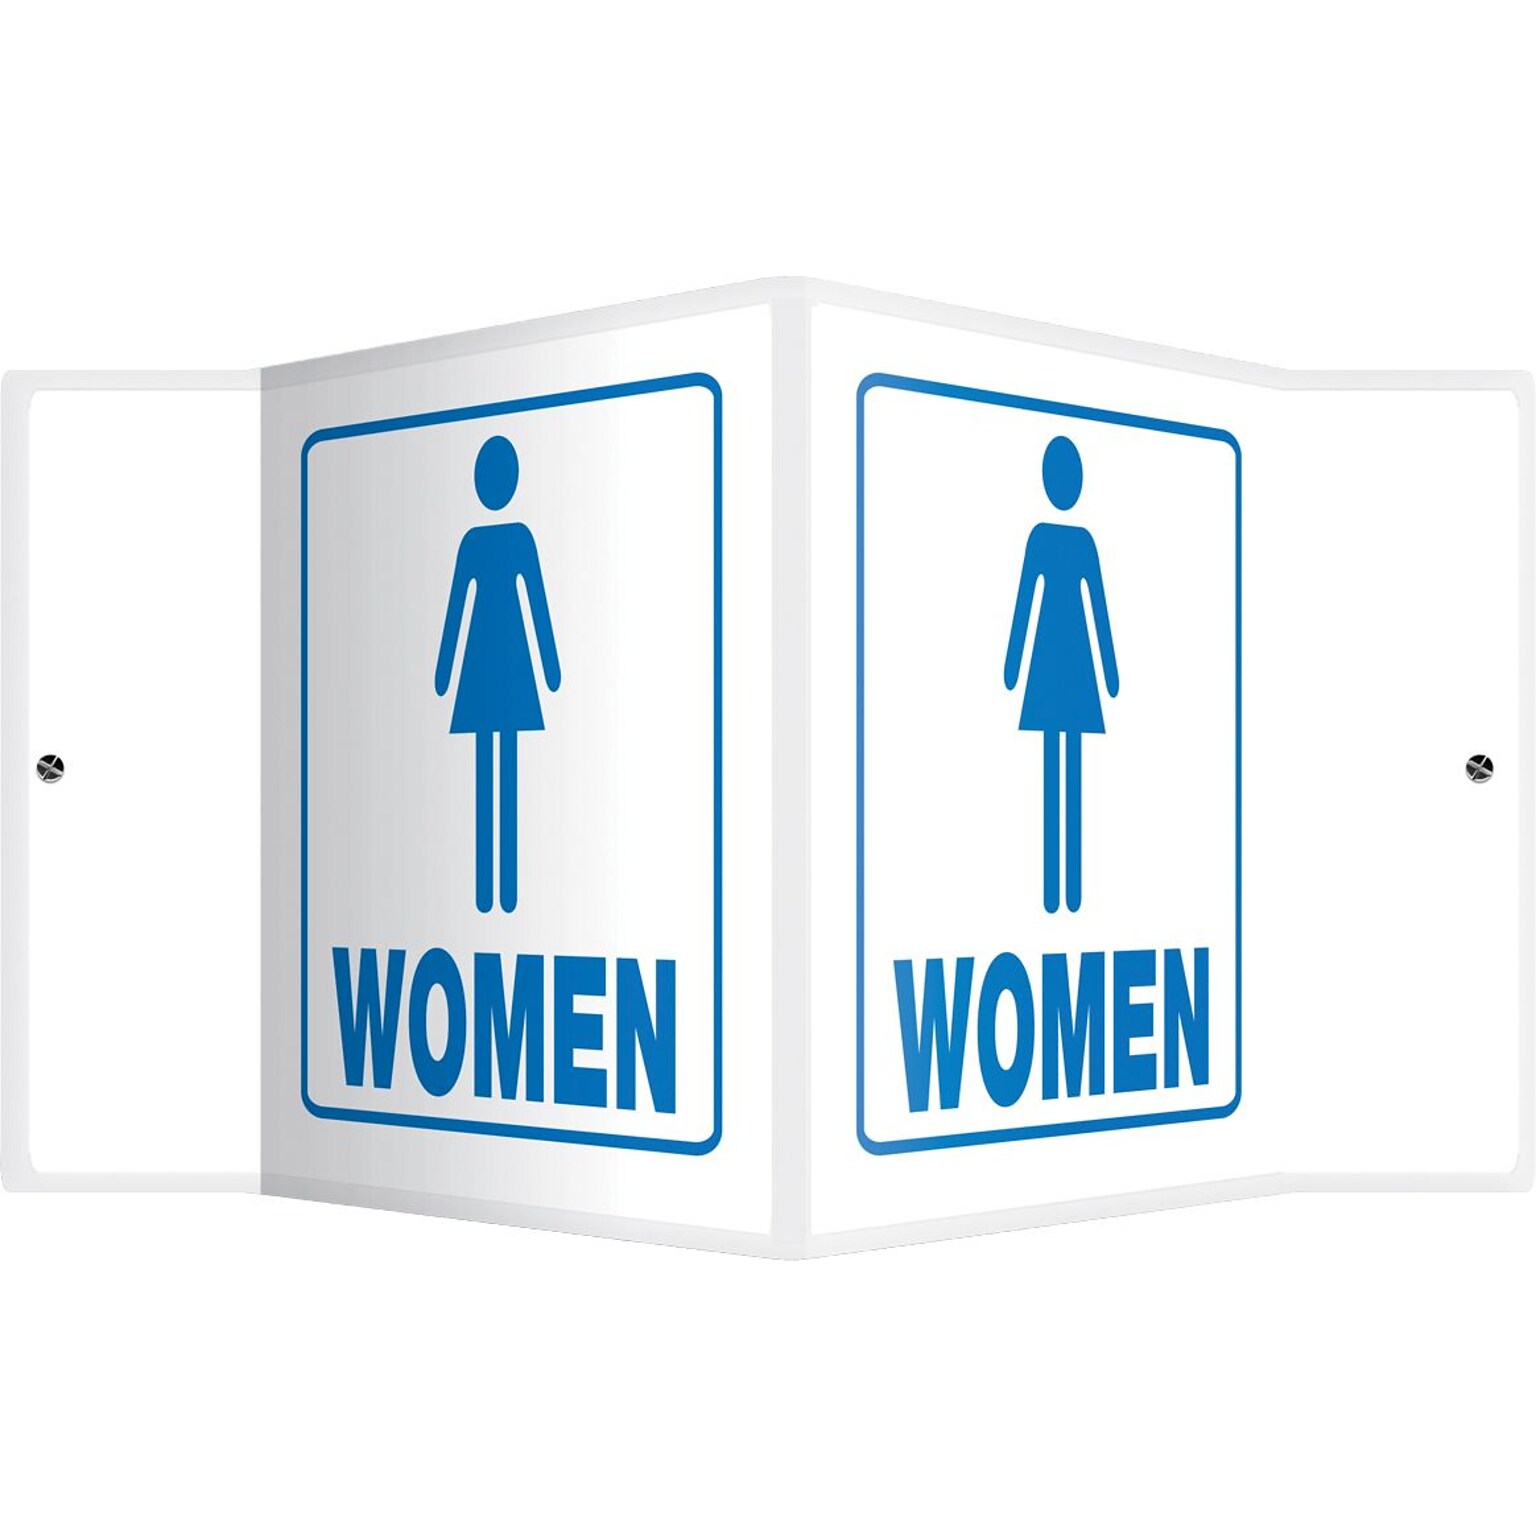 Accuform Women Restroom Projection Sign, Blue/White, 6H x 5W (PSP633)